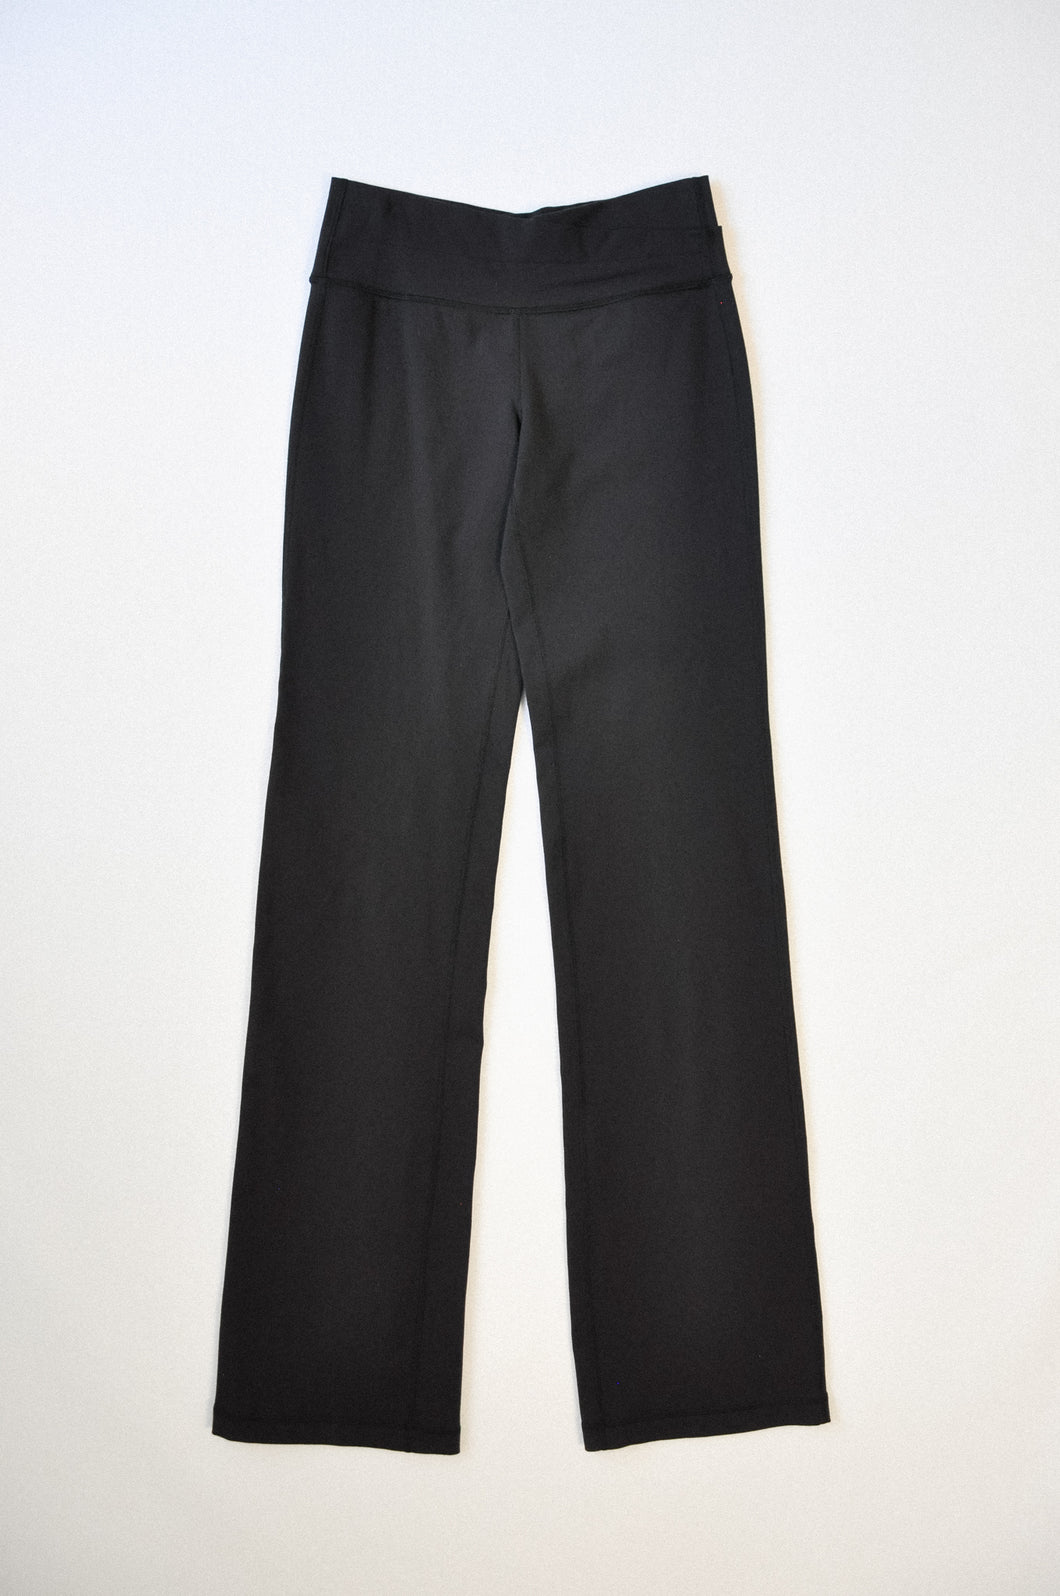 Lululemon Crossover Groove Pant | Size 6